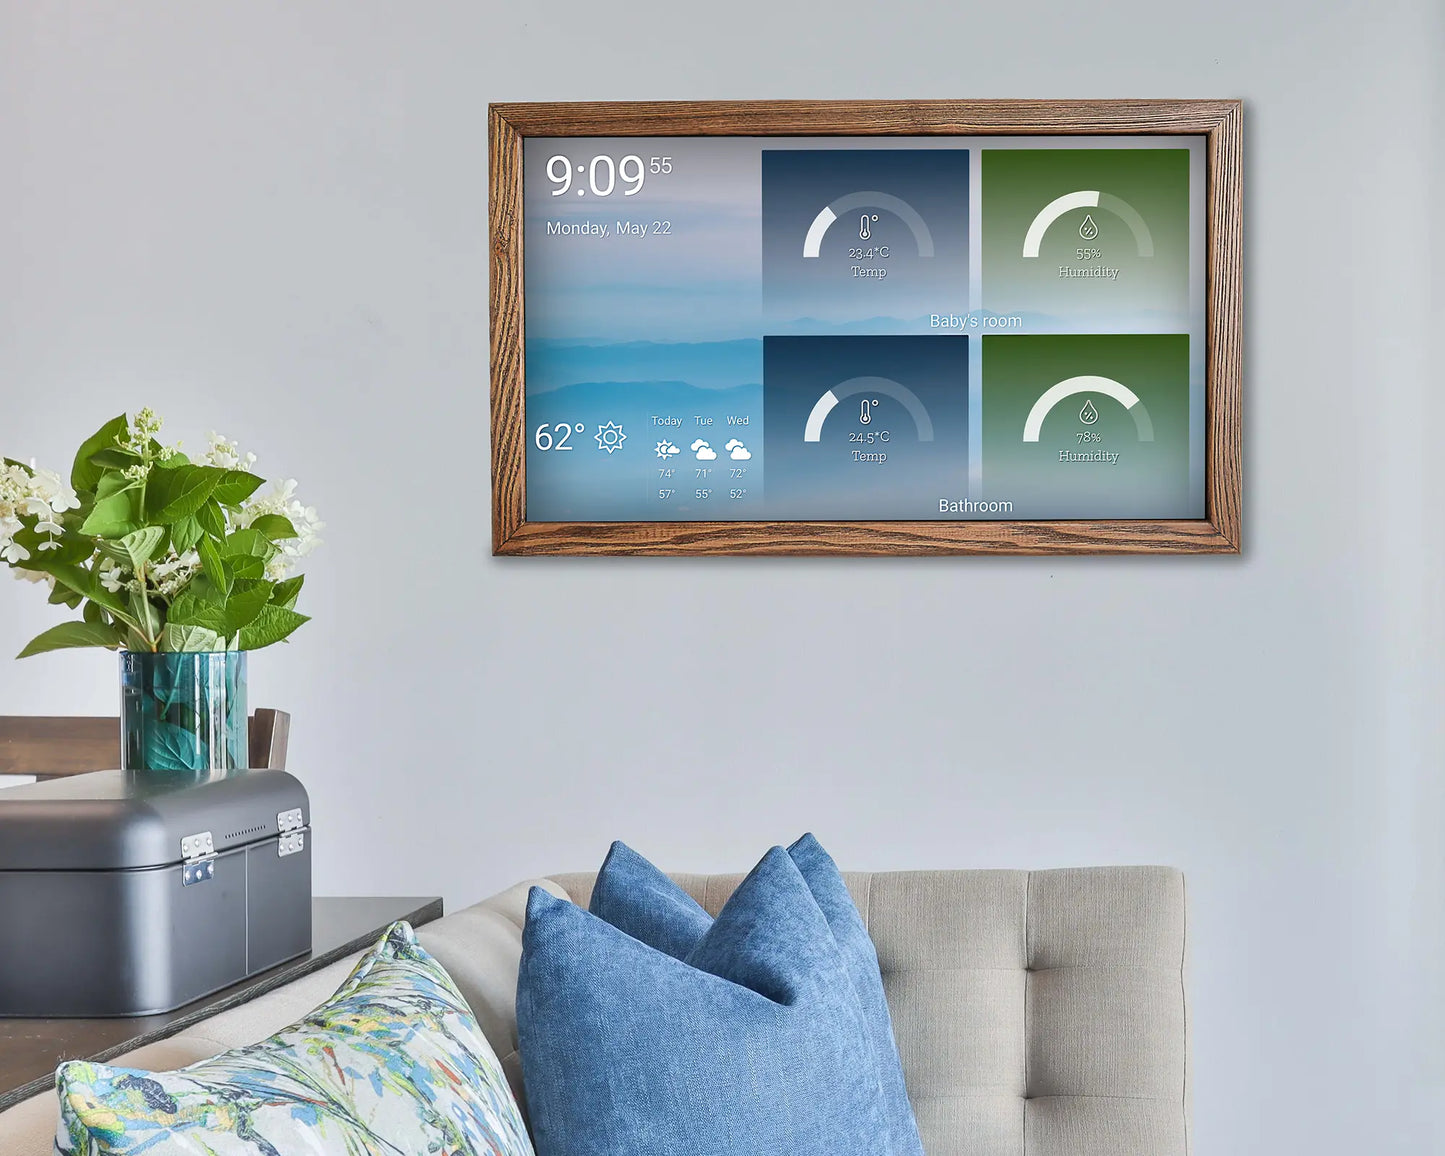 Smart Display 24 Inch with Temperature and Humidity Sensor